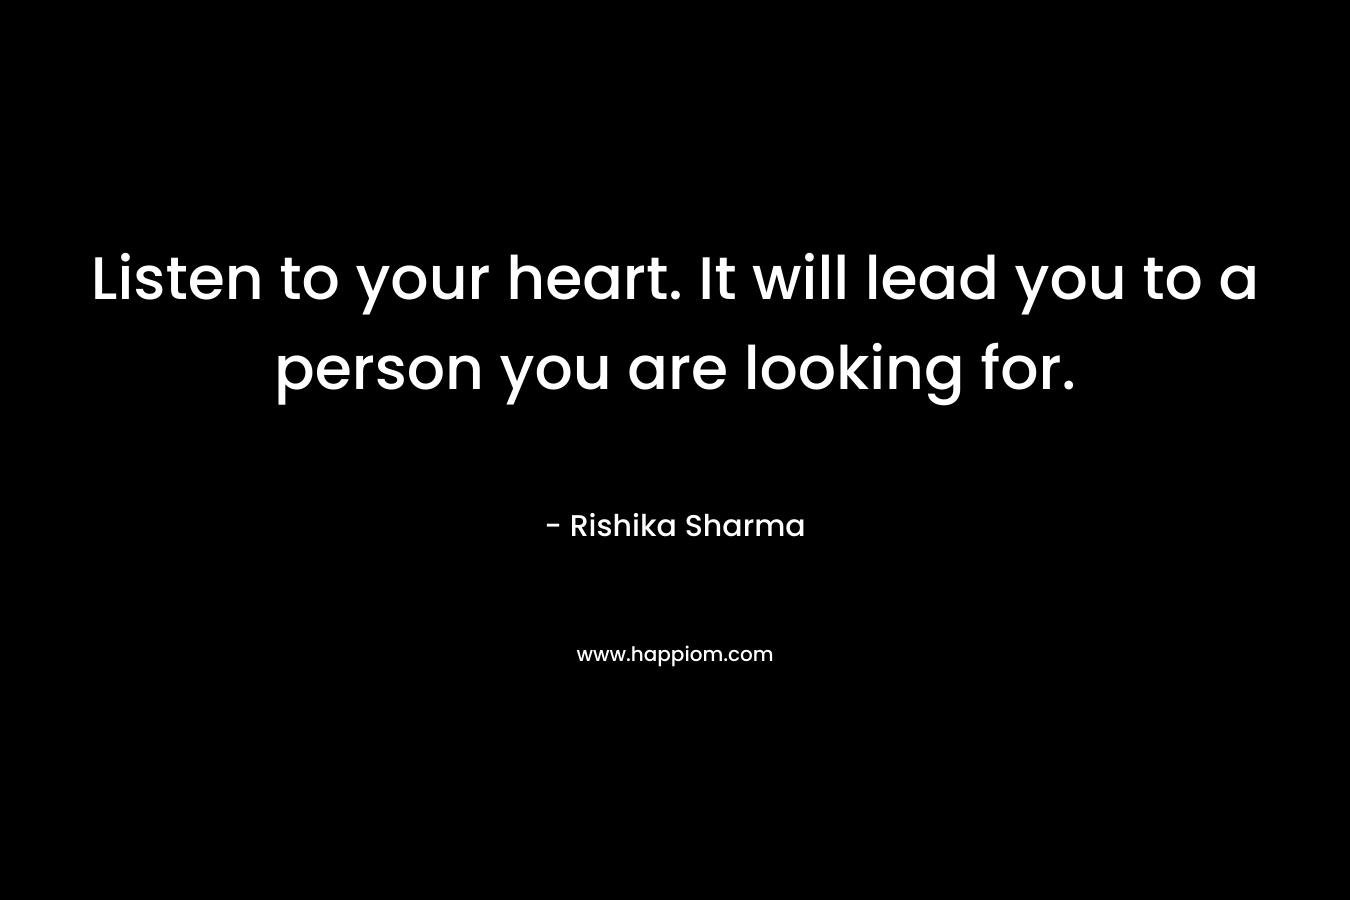 Listen to your heart. It will lead you to a person you are looking for.